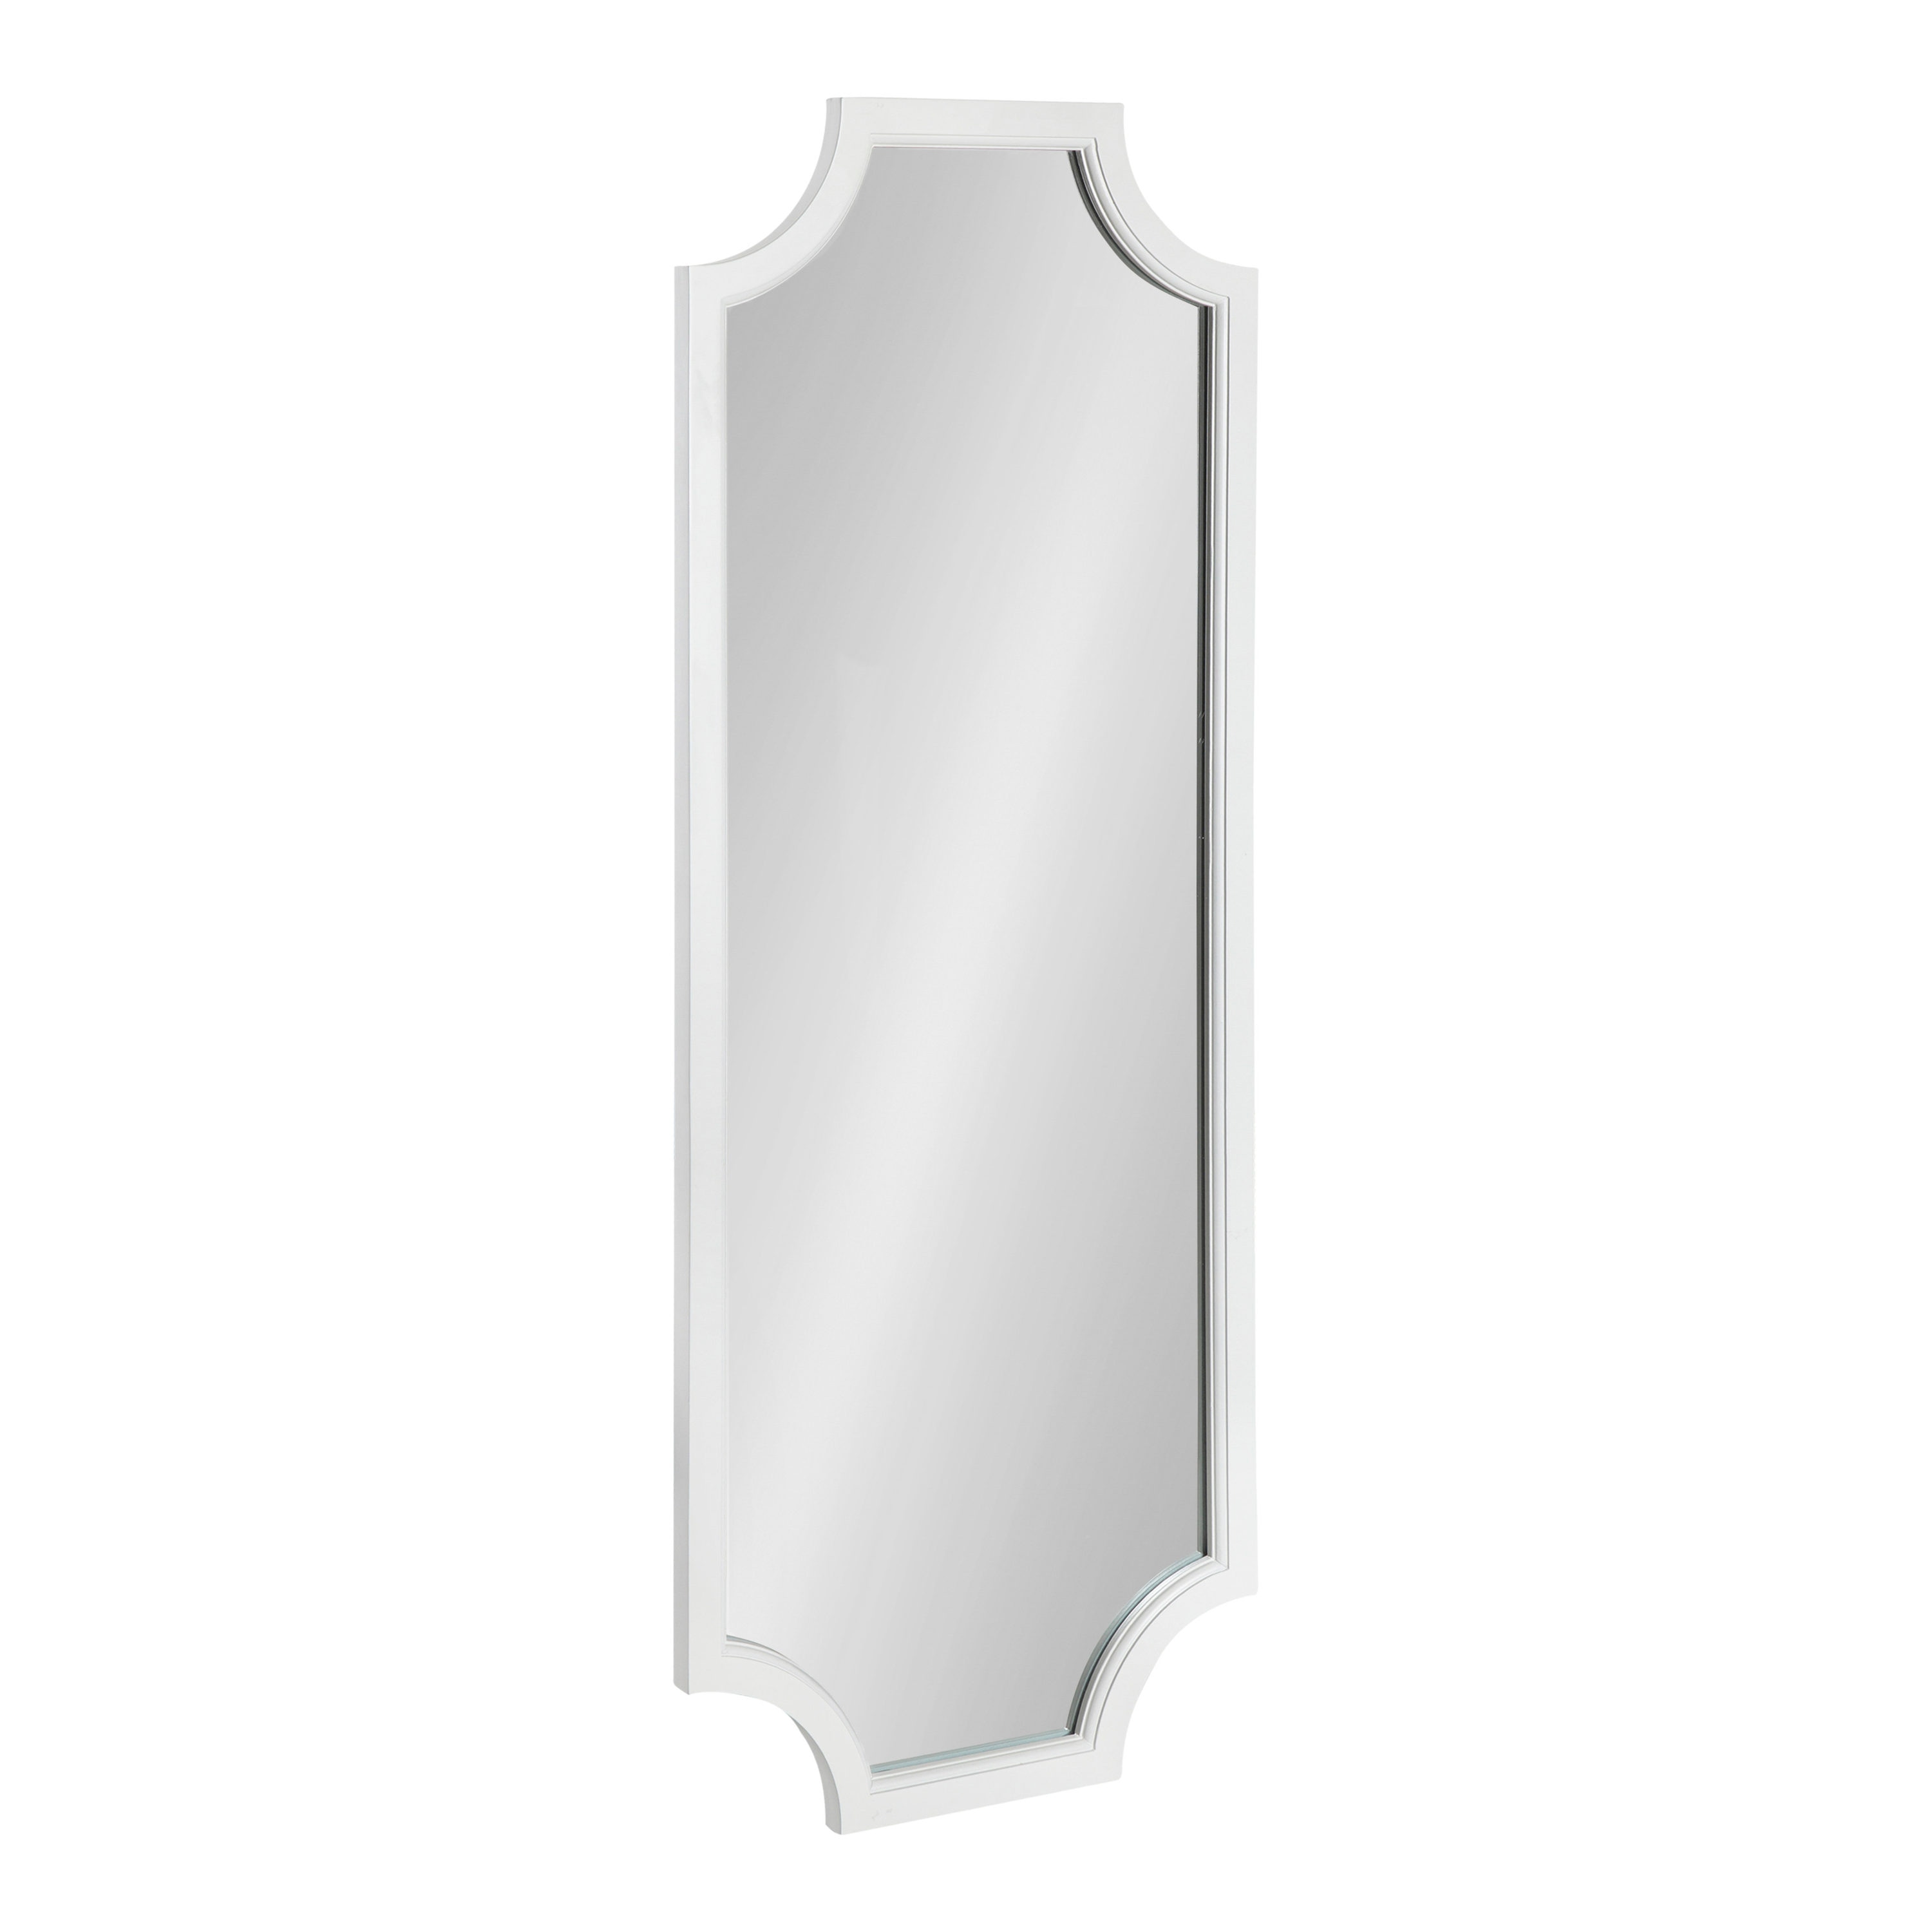 White Kate and Laurel Hogan Wood Framed Full-Length Wall Mirror with Scallop Corners 18x48 Inches 